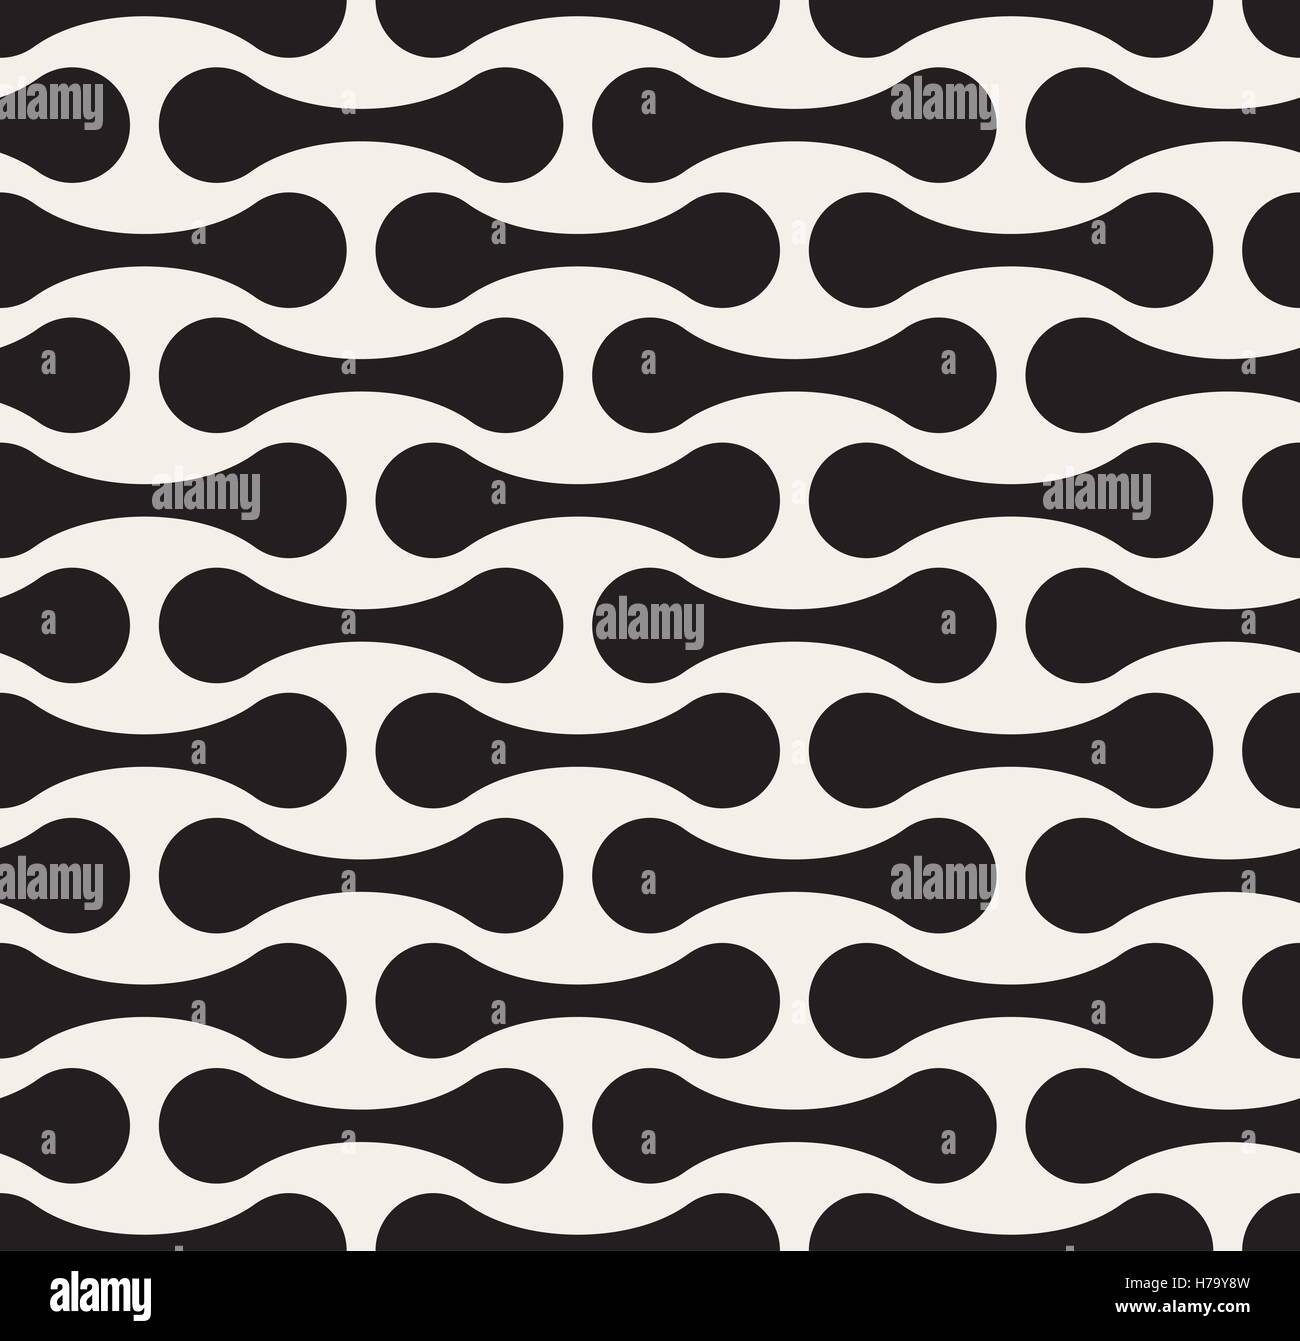 Vector Seamless Black and White Arc Connected Circles Rounded Lines Pattern Stock Vector